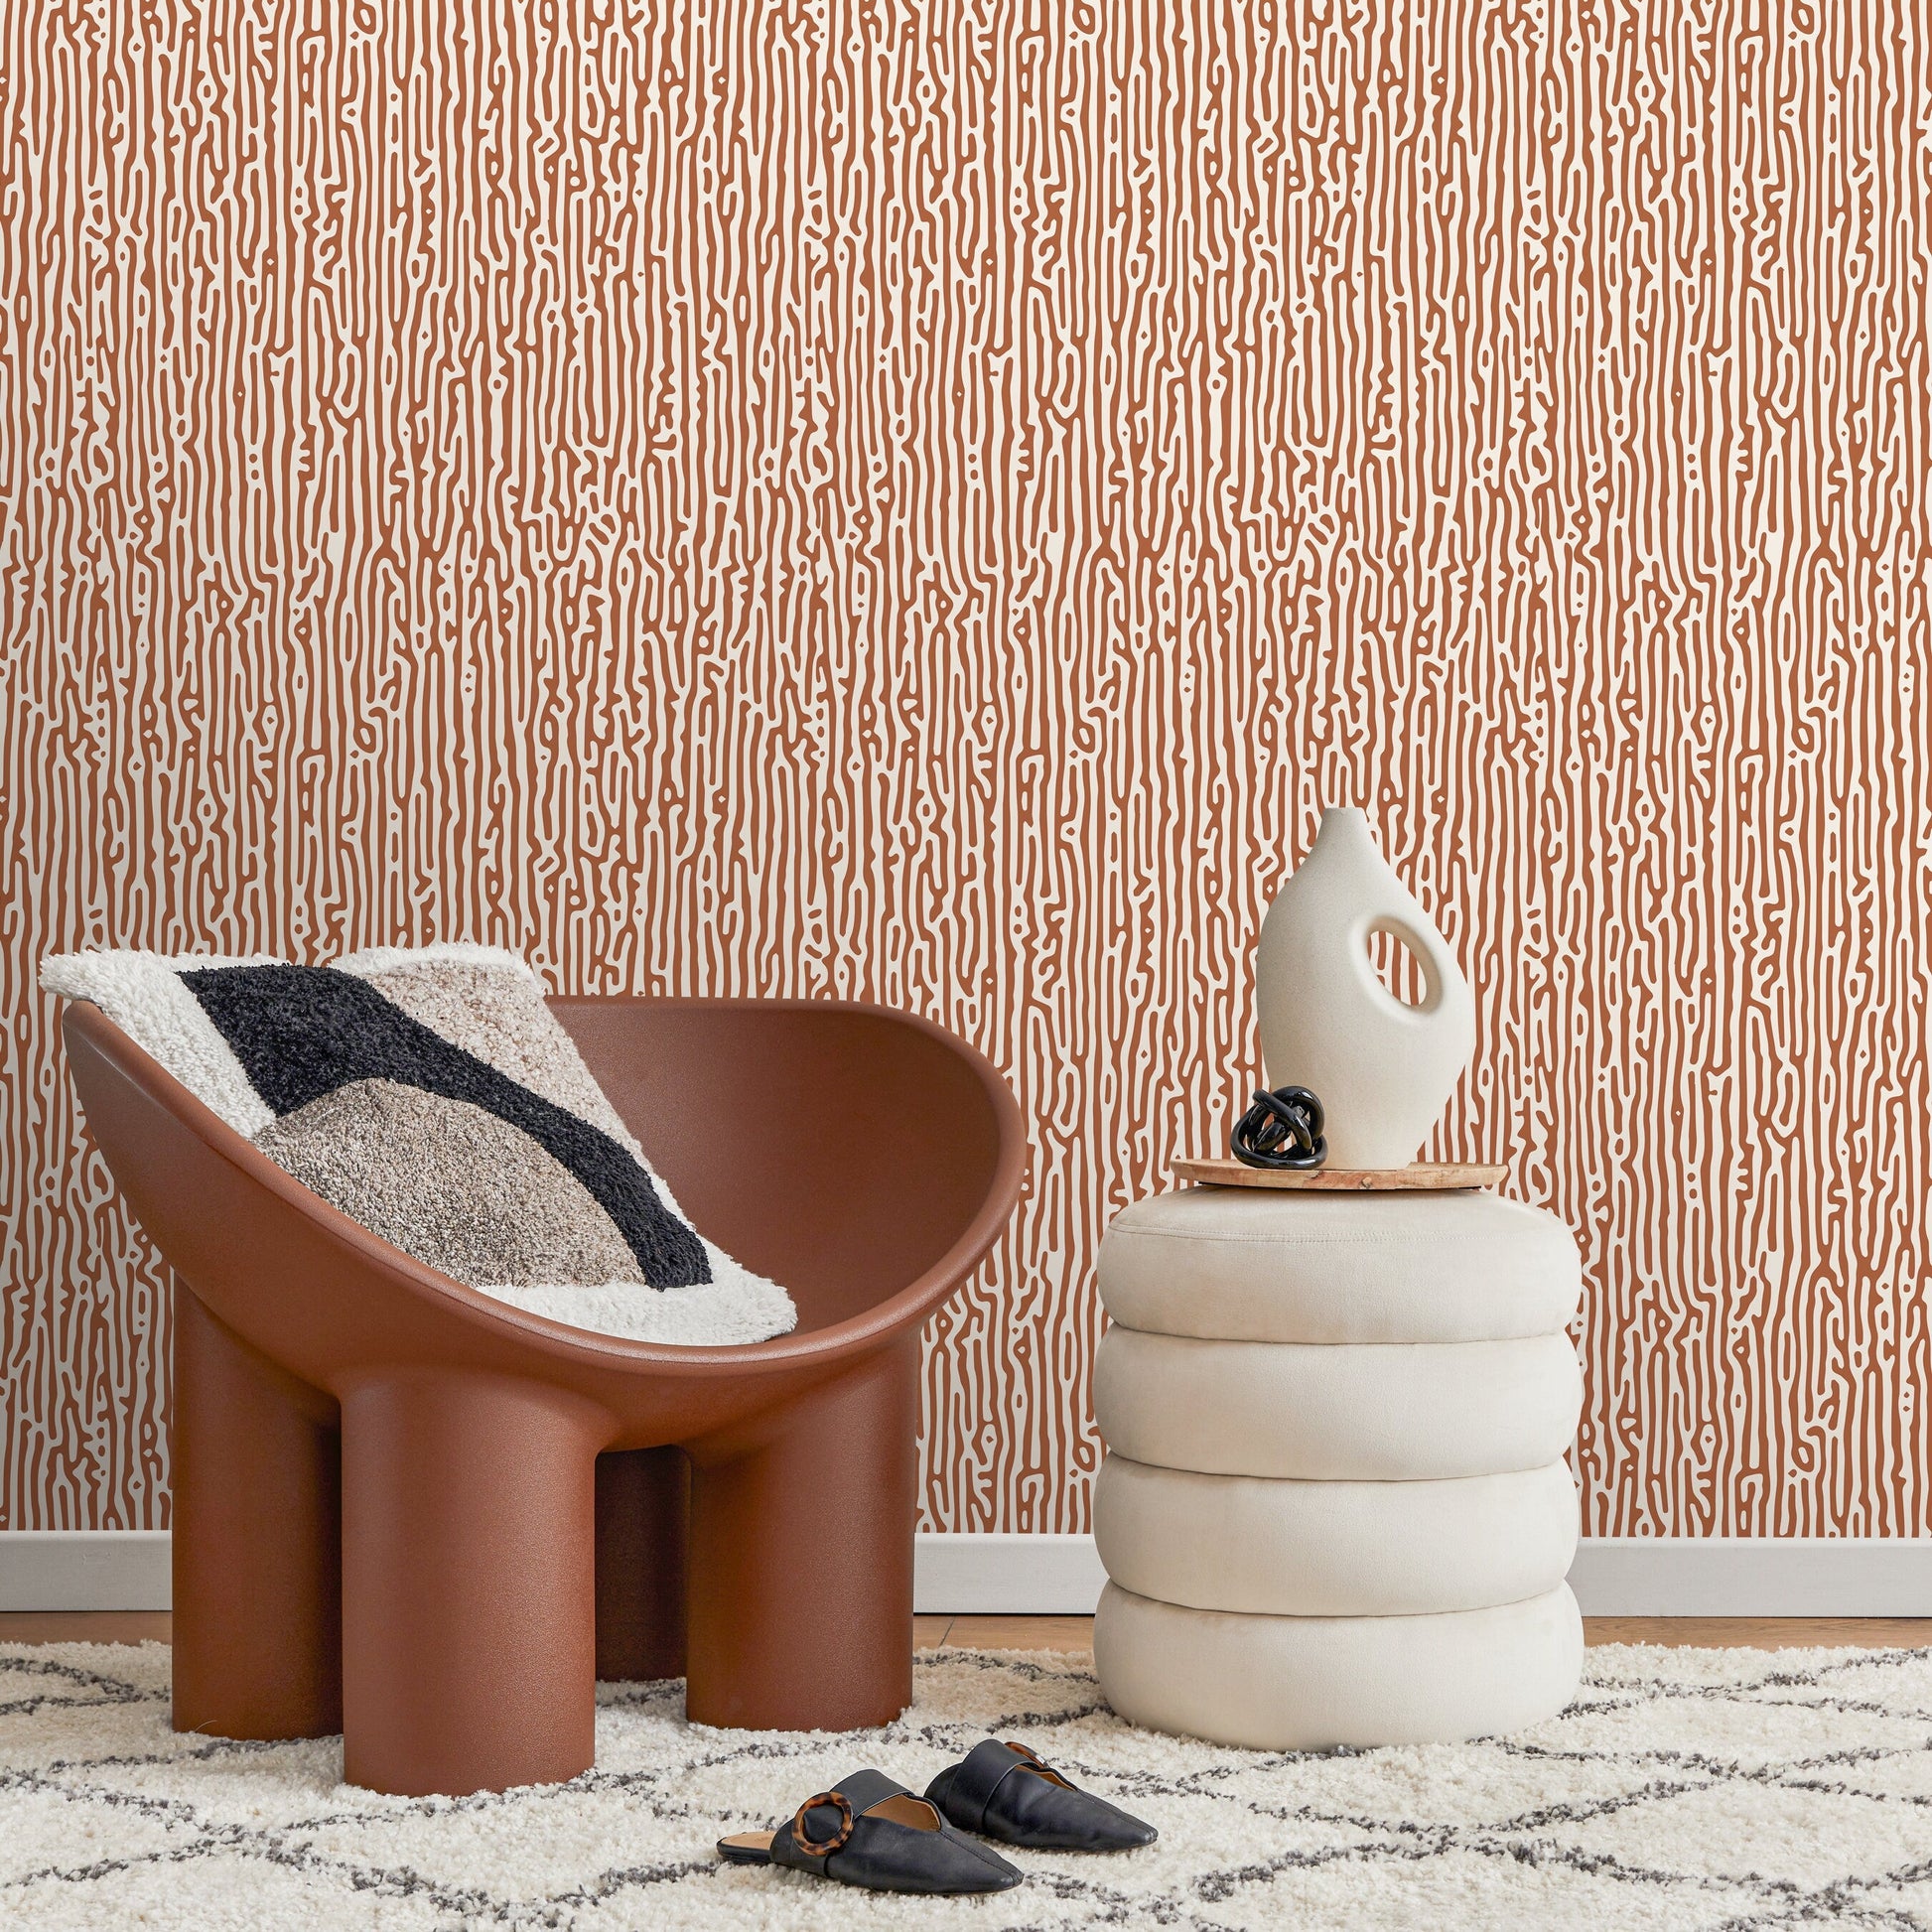 Terracotta Abstract Wallpaper Contemporary Art Wallpaper Peel and Stick and Traditional Wallpaper - D854